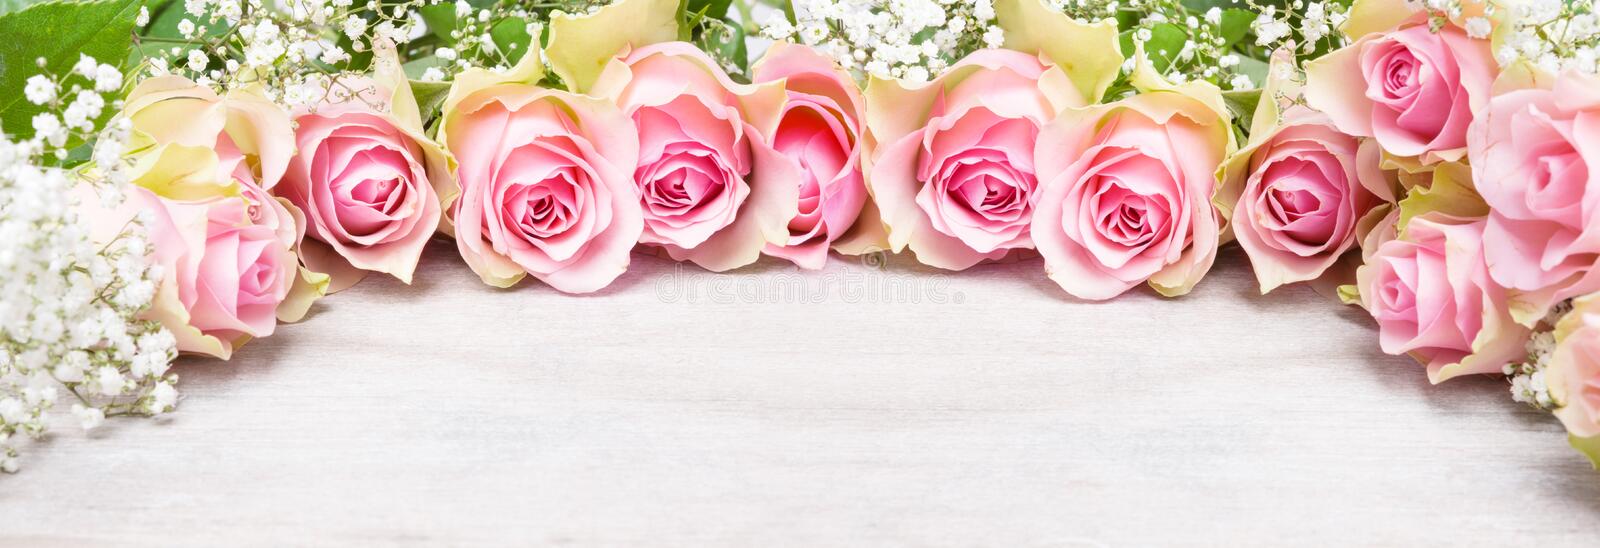 pink-roses-baby-s-breath-banner-greeting-card-66538688.jpg